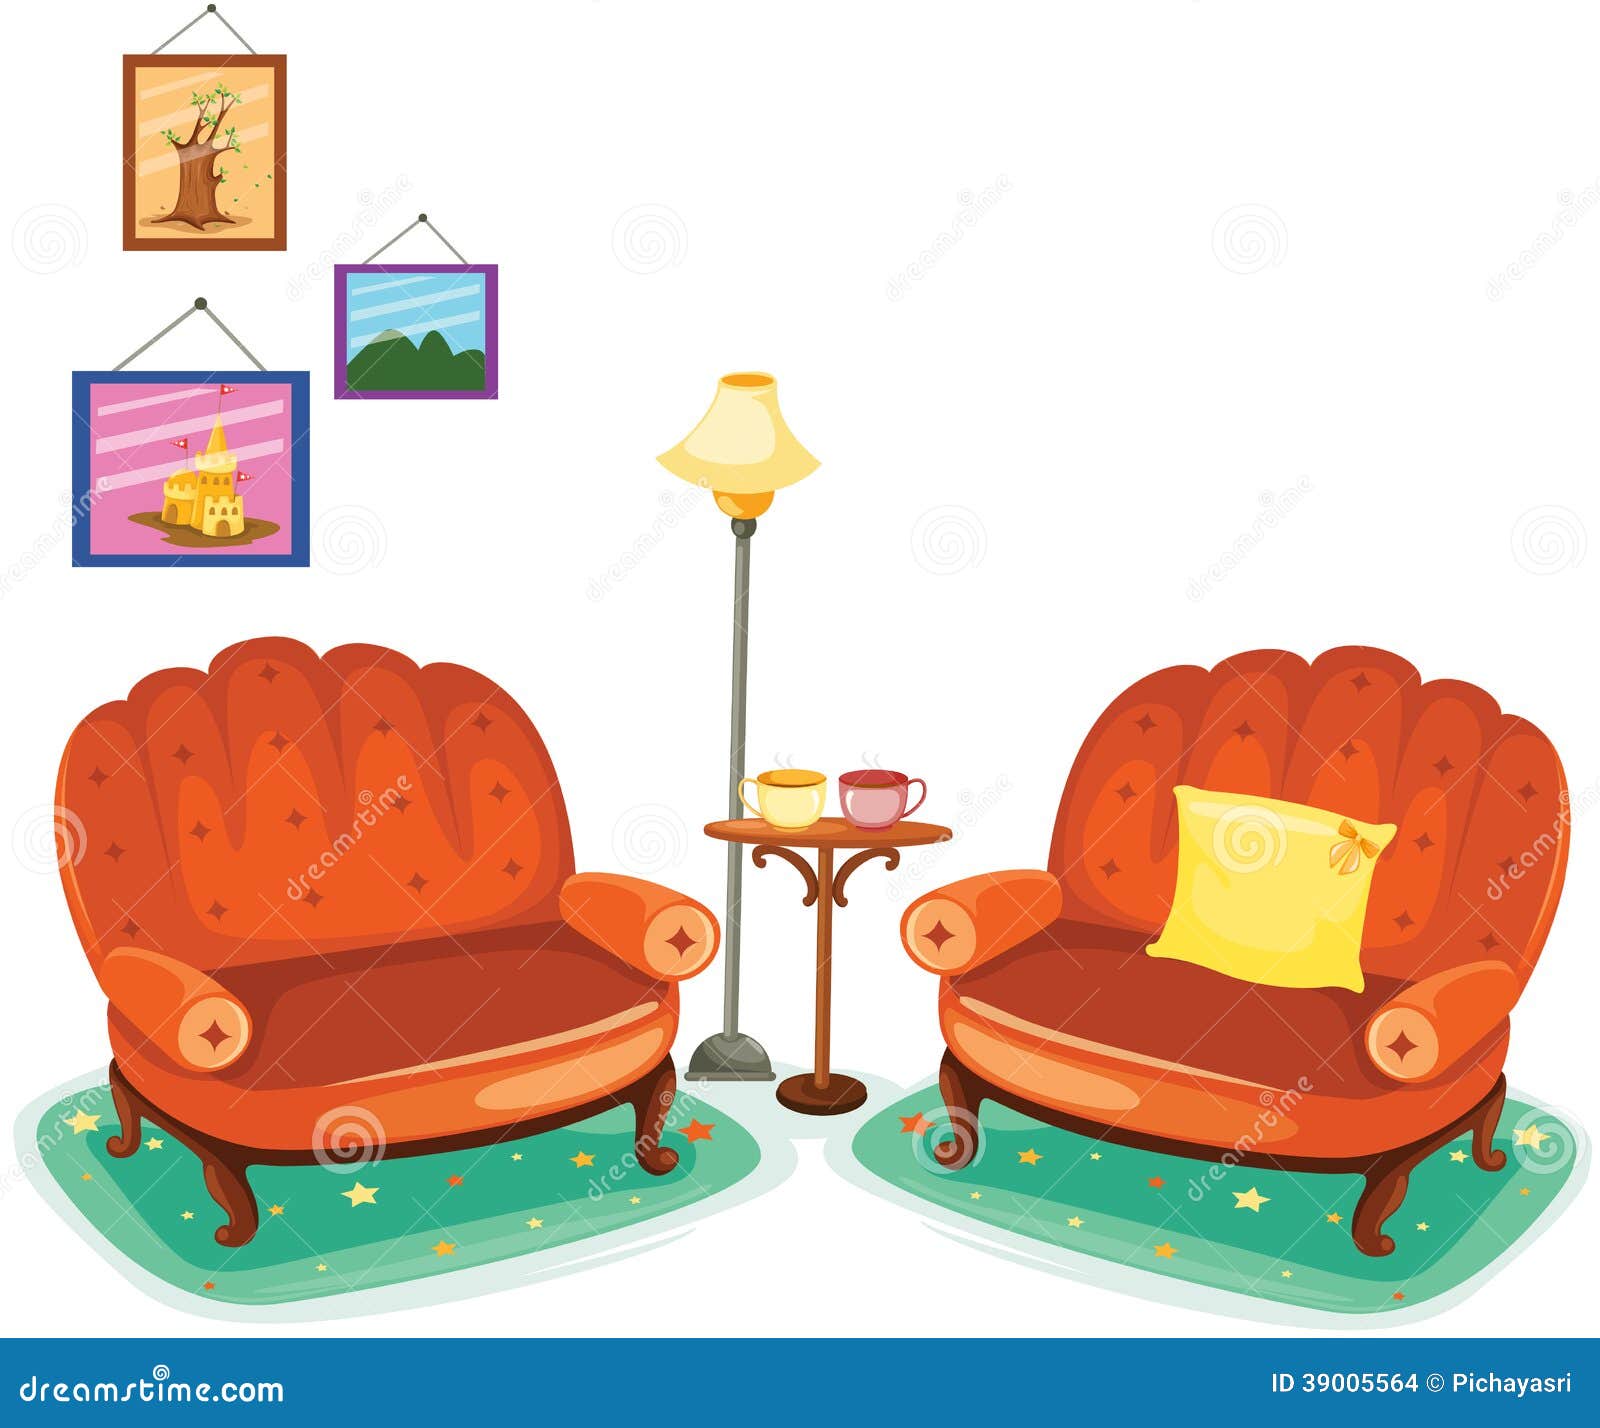 clipart living room - photo #36